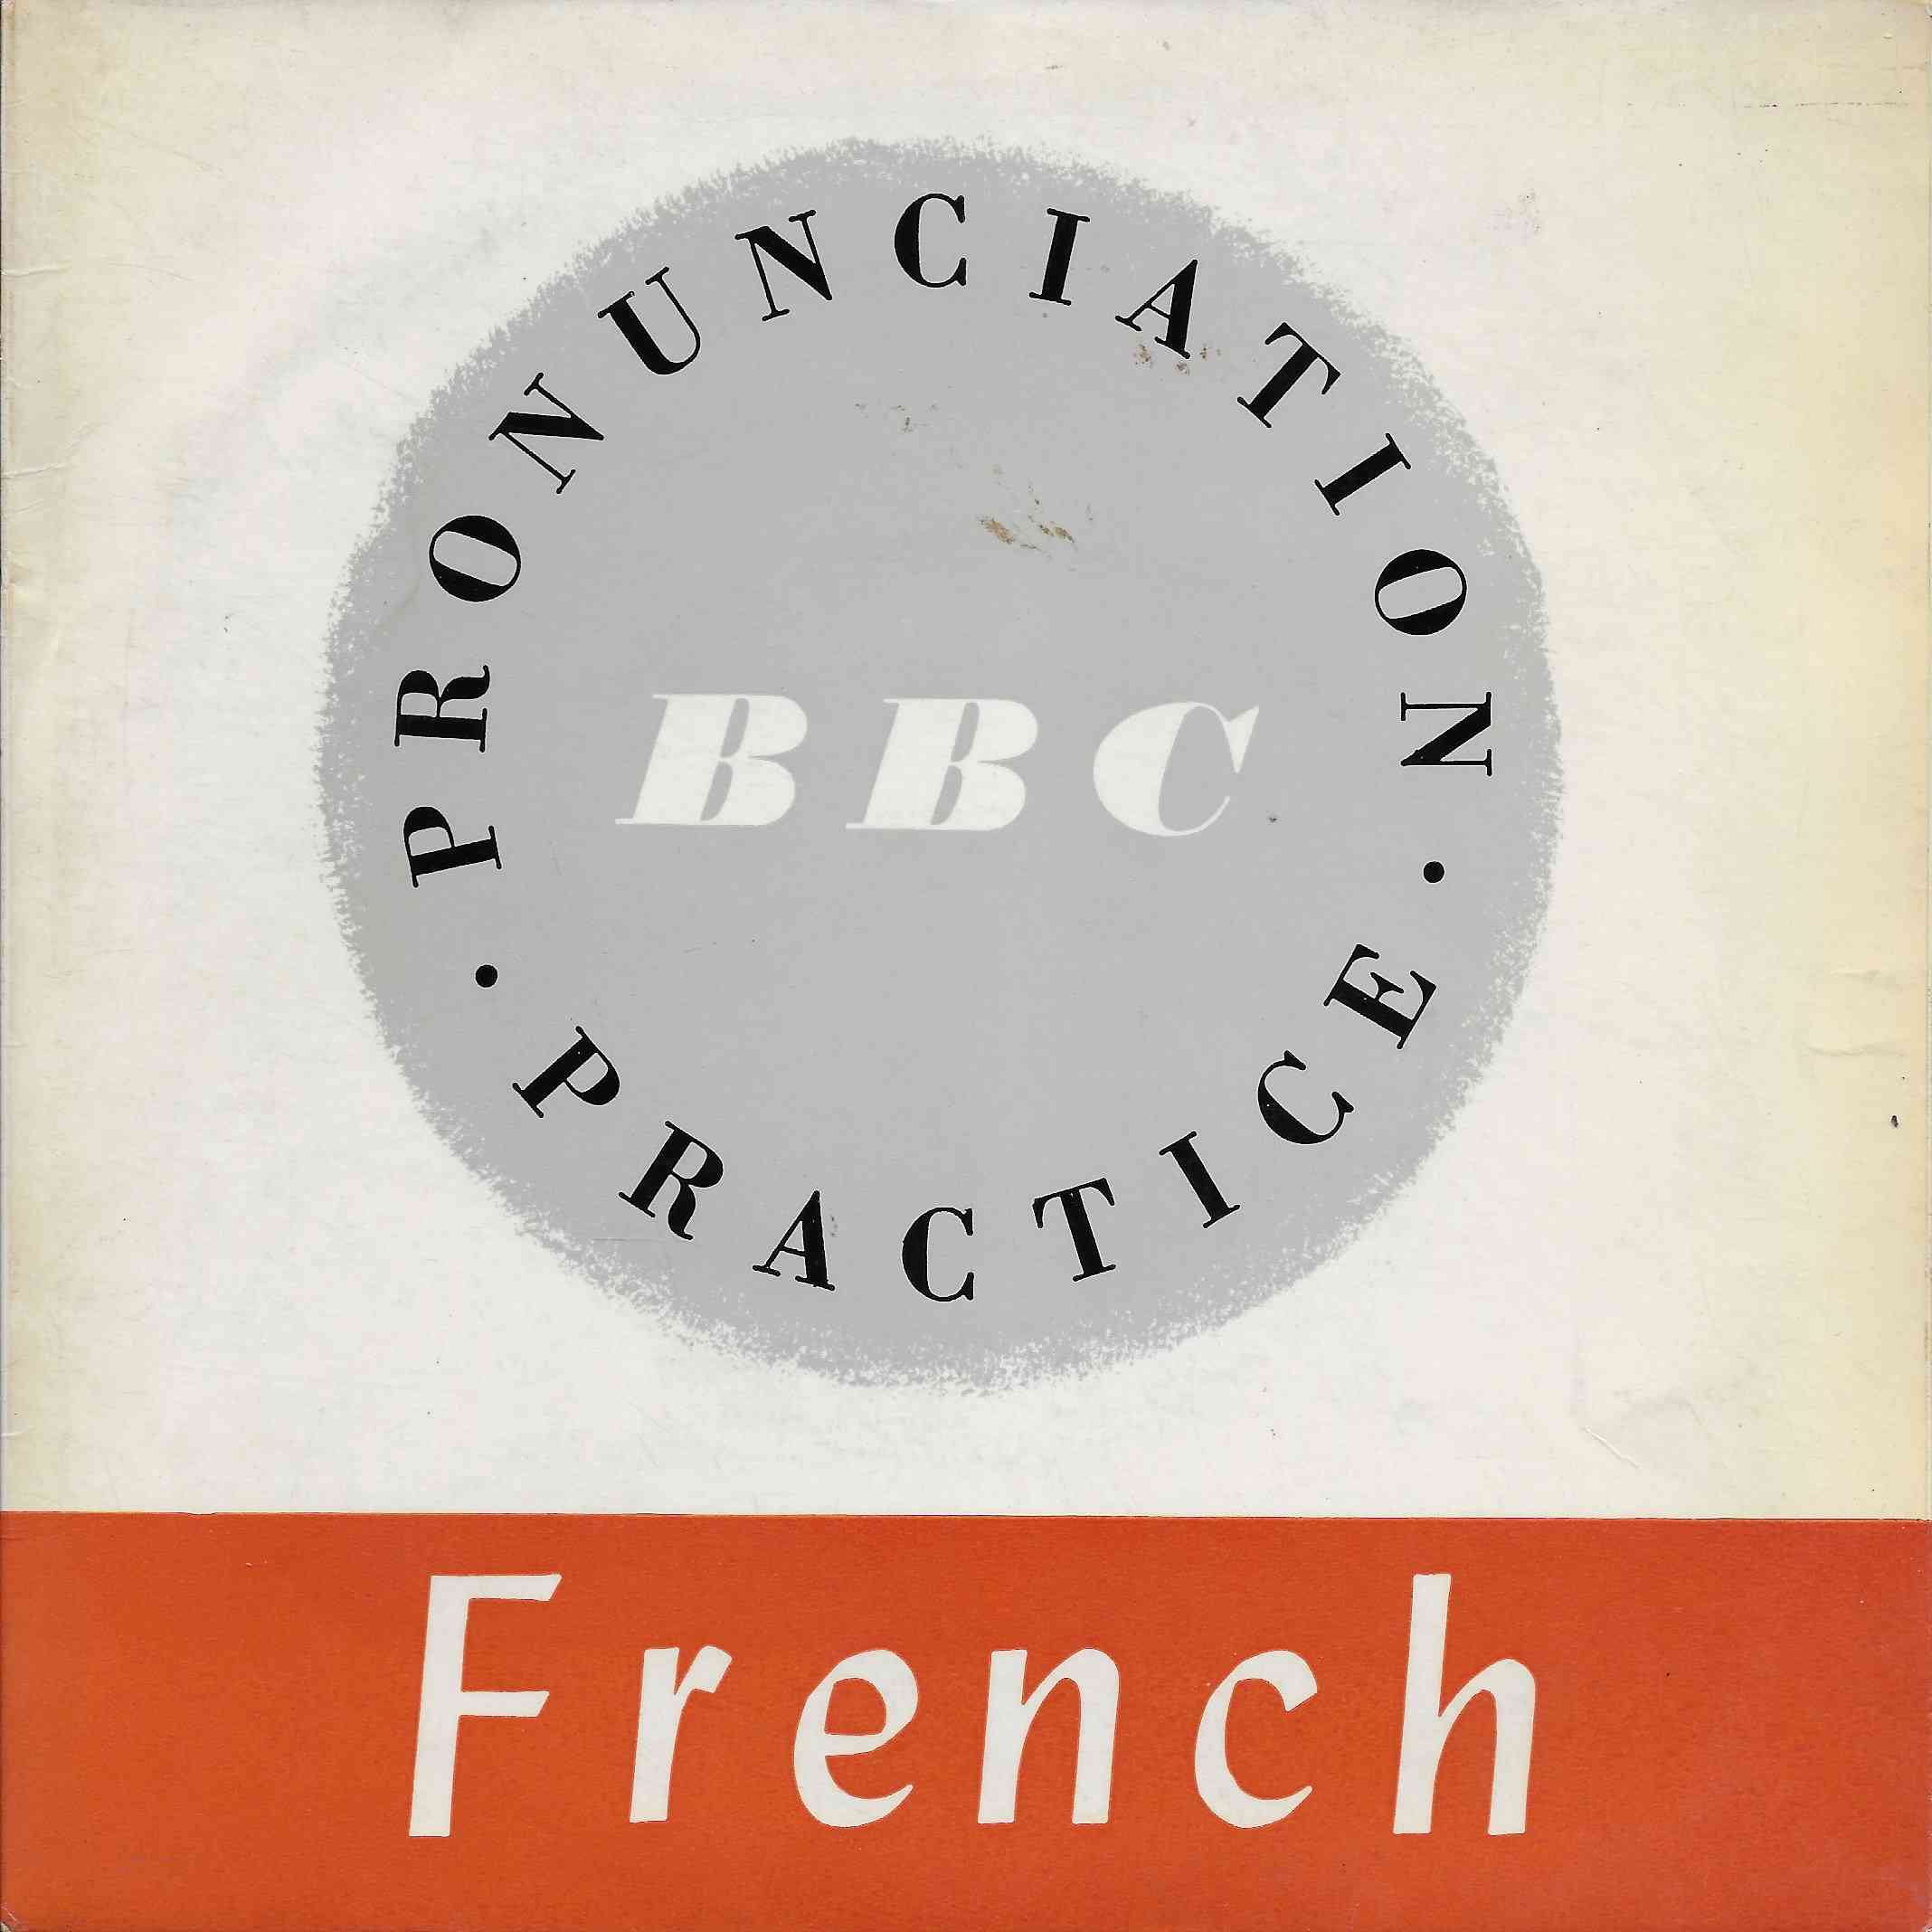 Picture of FRE-A-1 French single by artist Elsie Ferguson from the BBC records and Tapes library